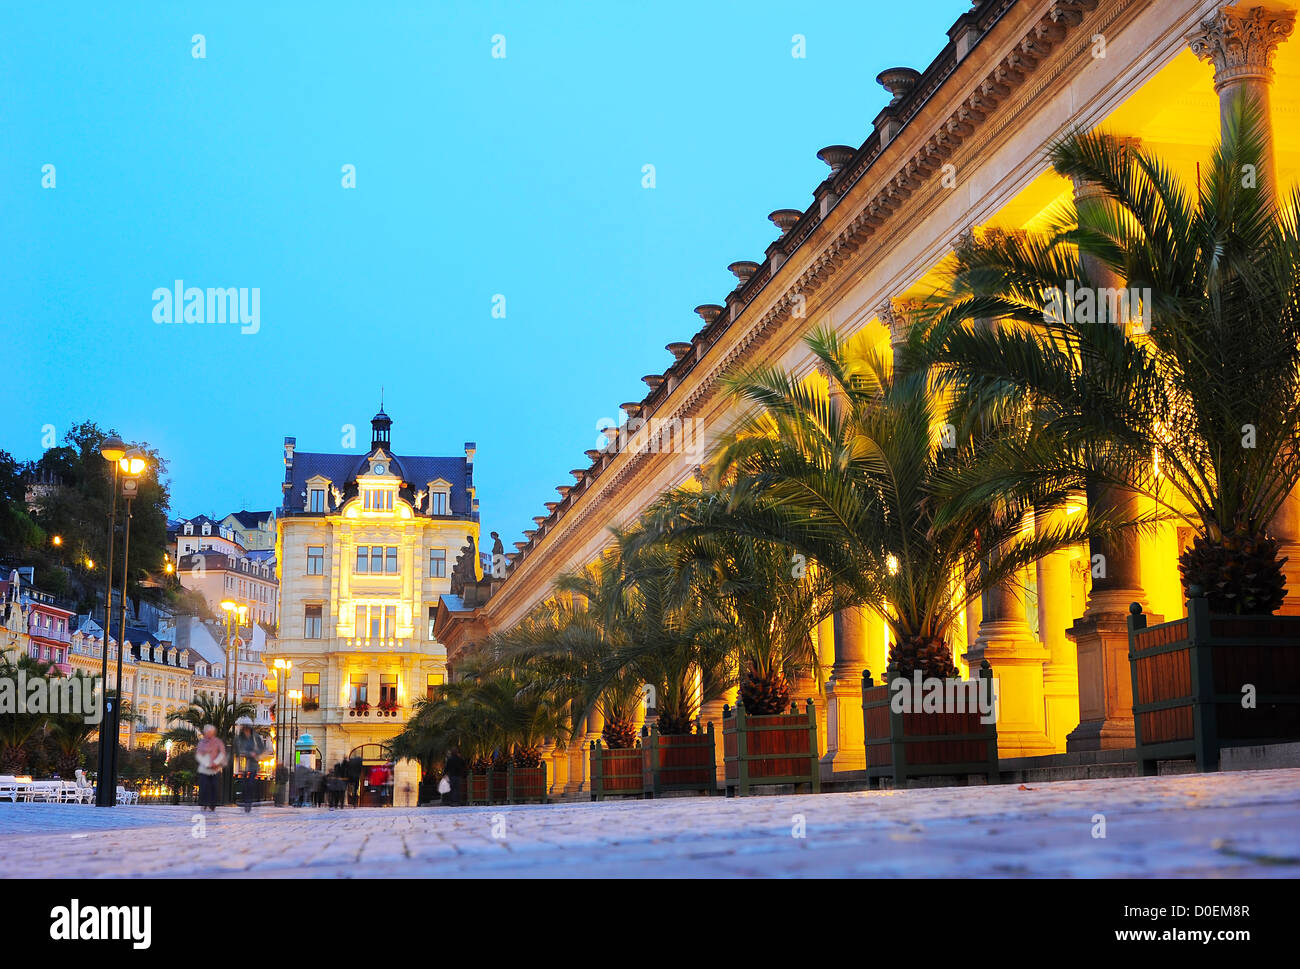 Karlovy Vary thermal mineral springs colonnade, Czech Republic. Stock Photo